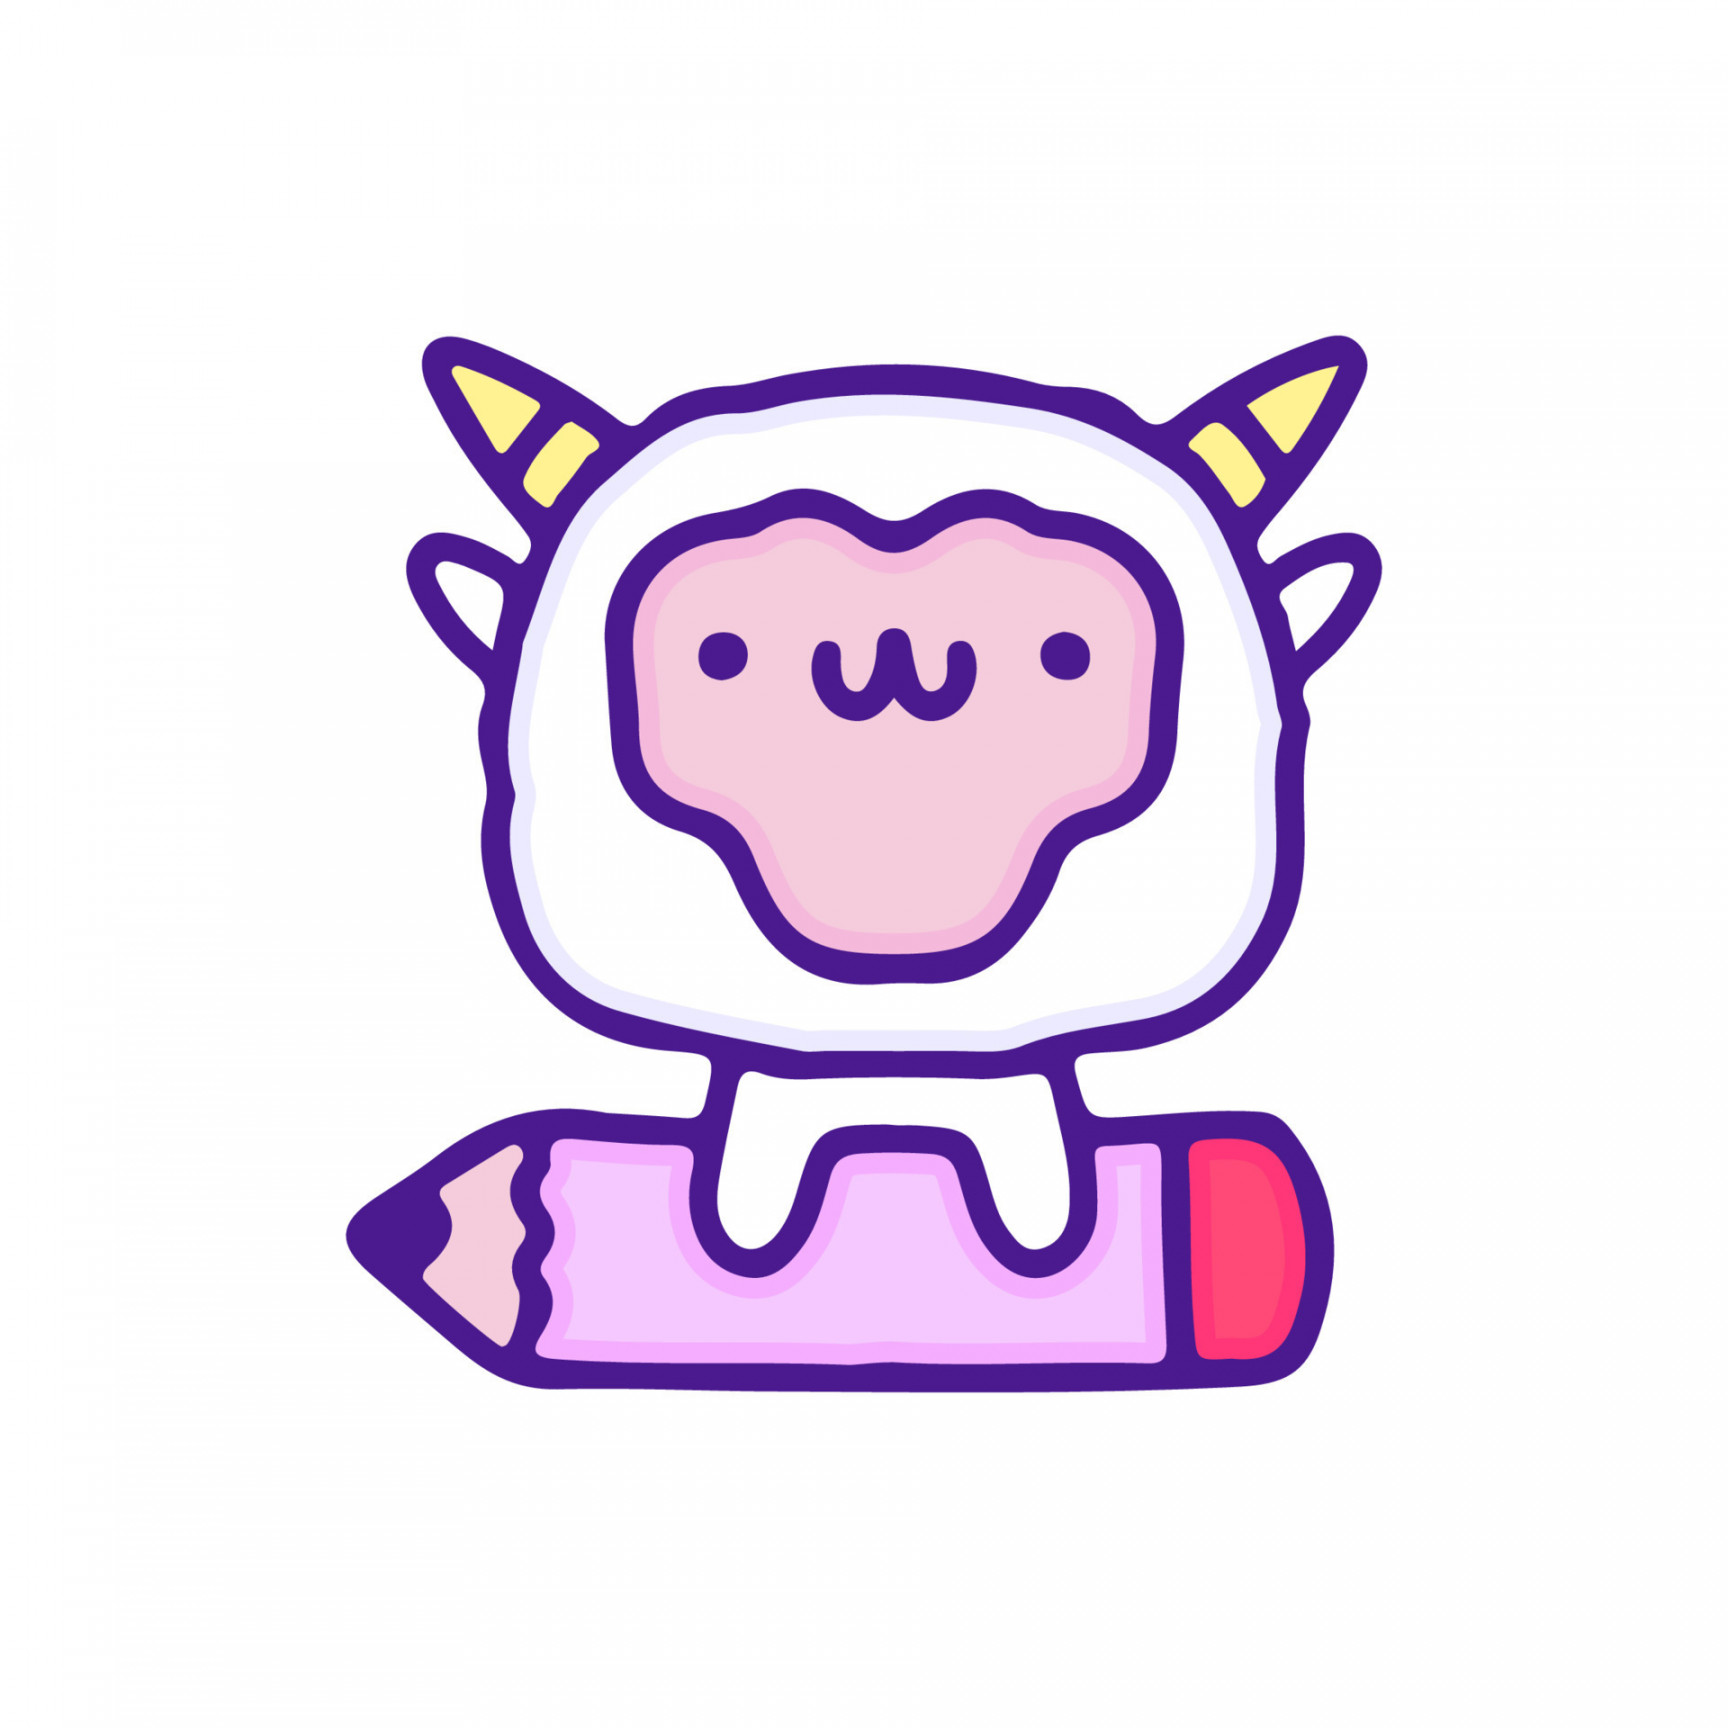 Cute sheep with pencil illustration, with soft pop style and old